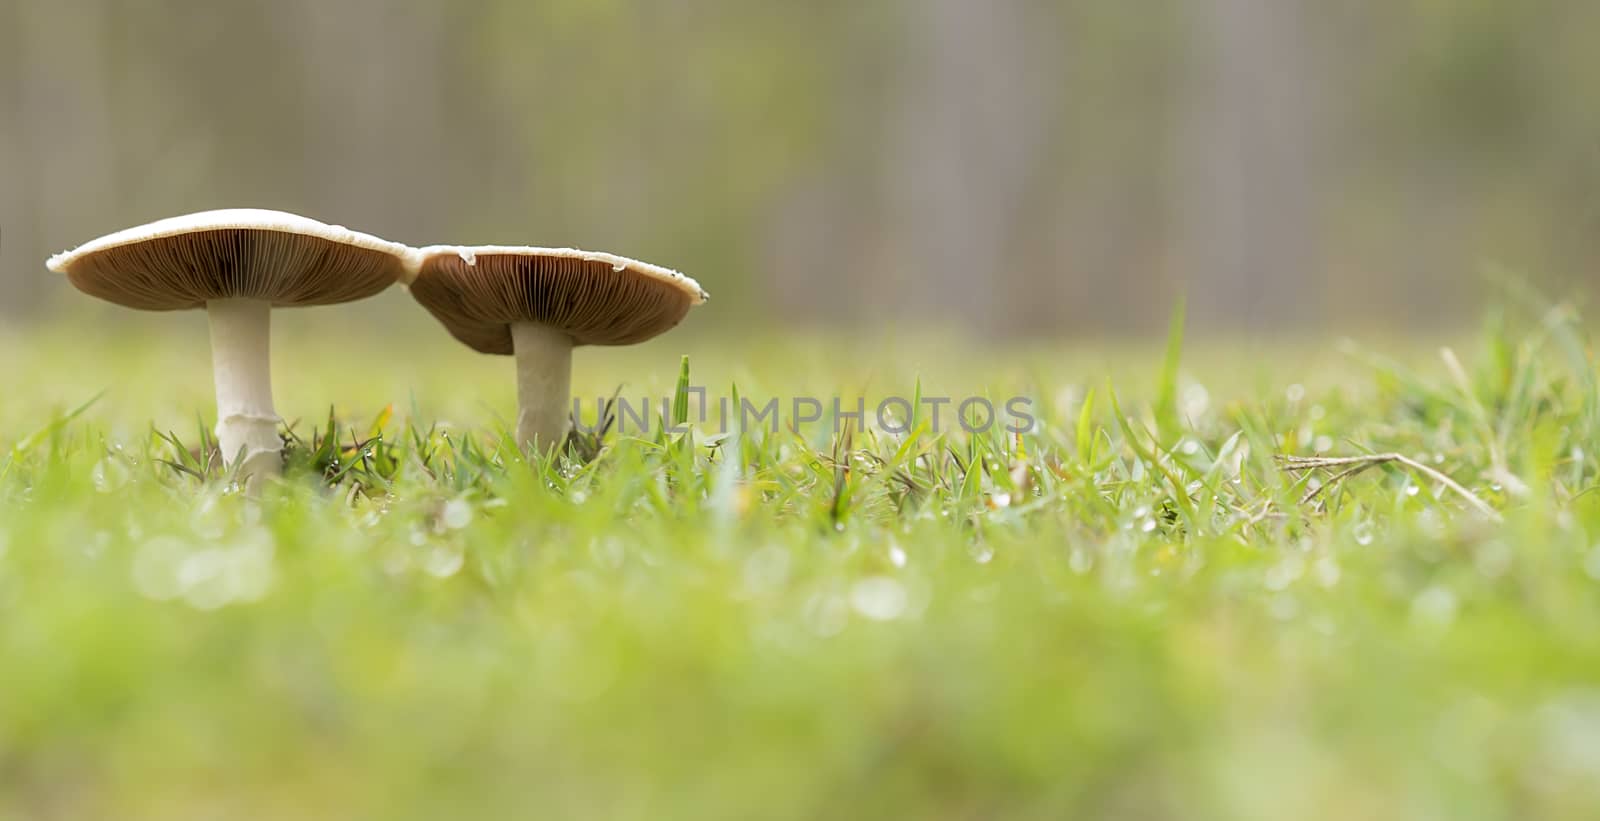 Two live mushrooms growing wild in wet green grass in field panorama view 